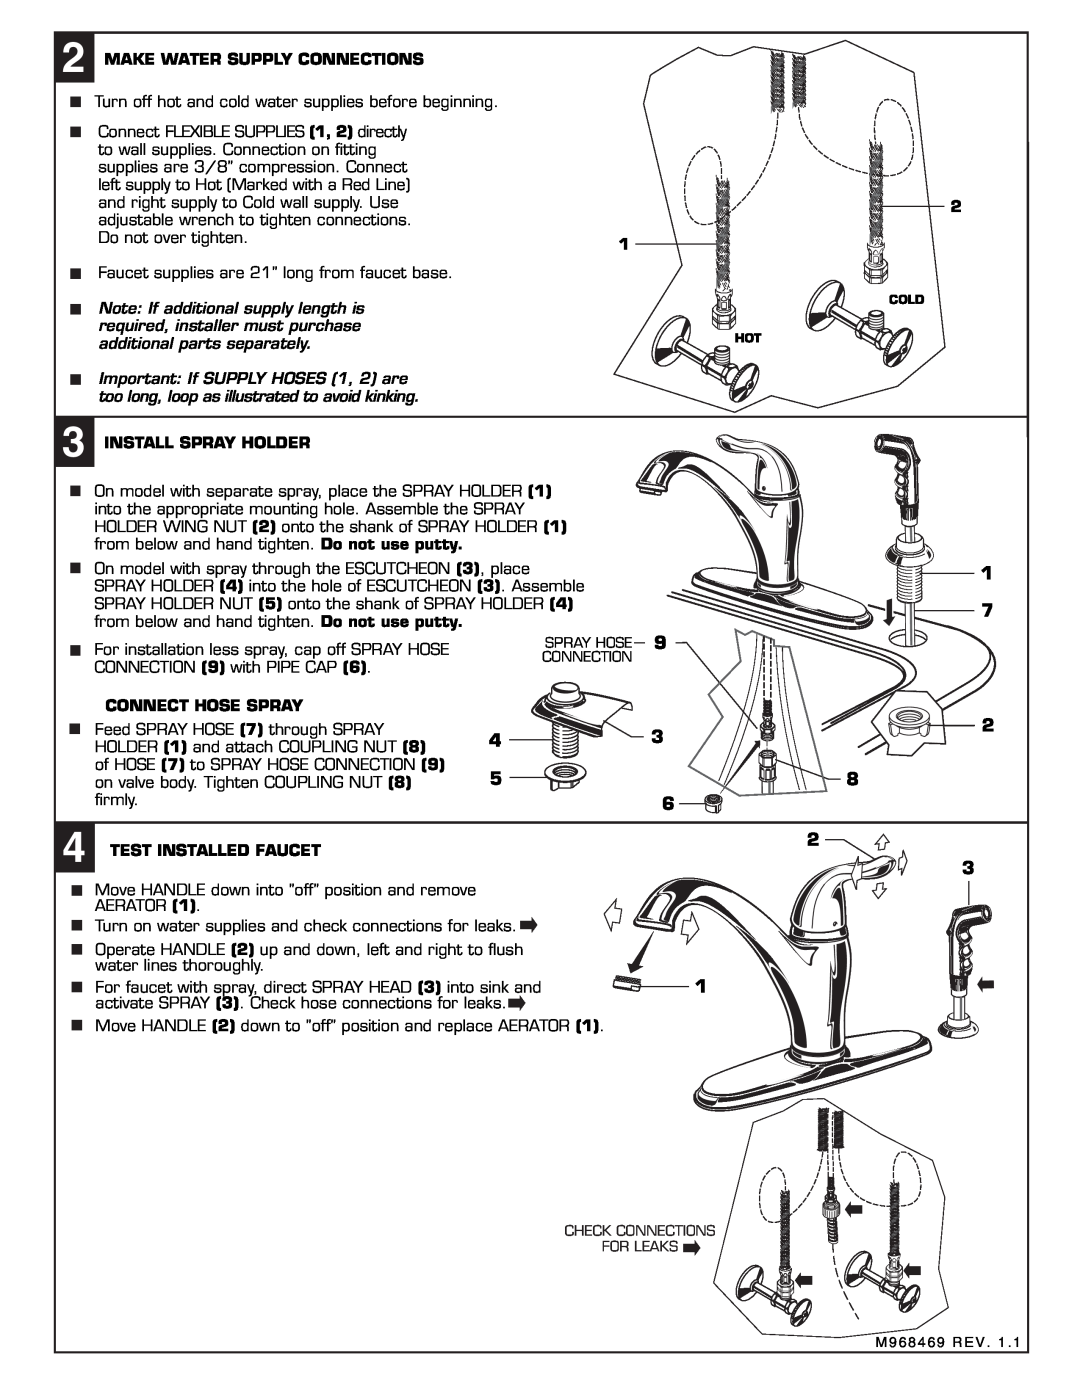 American Standard 4114.001, 4114.003  Make Water Supply Connections,  Install Spray Holder, Connect Hose Spray 